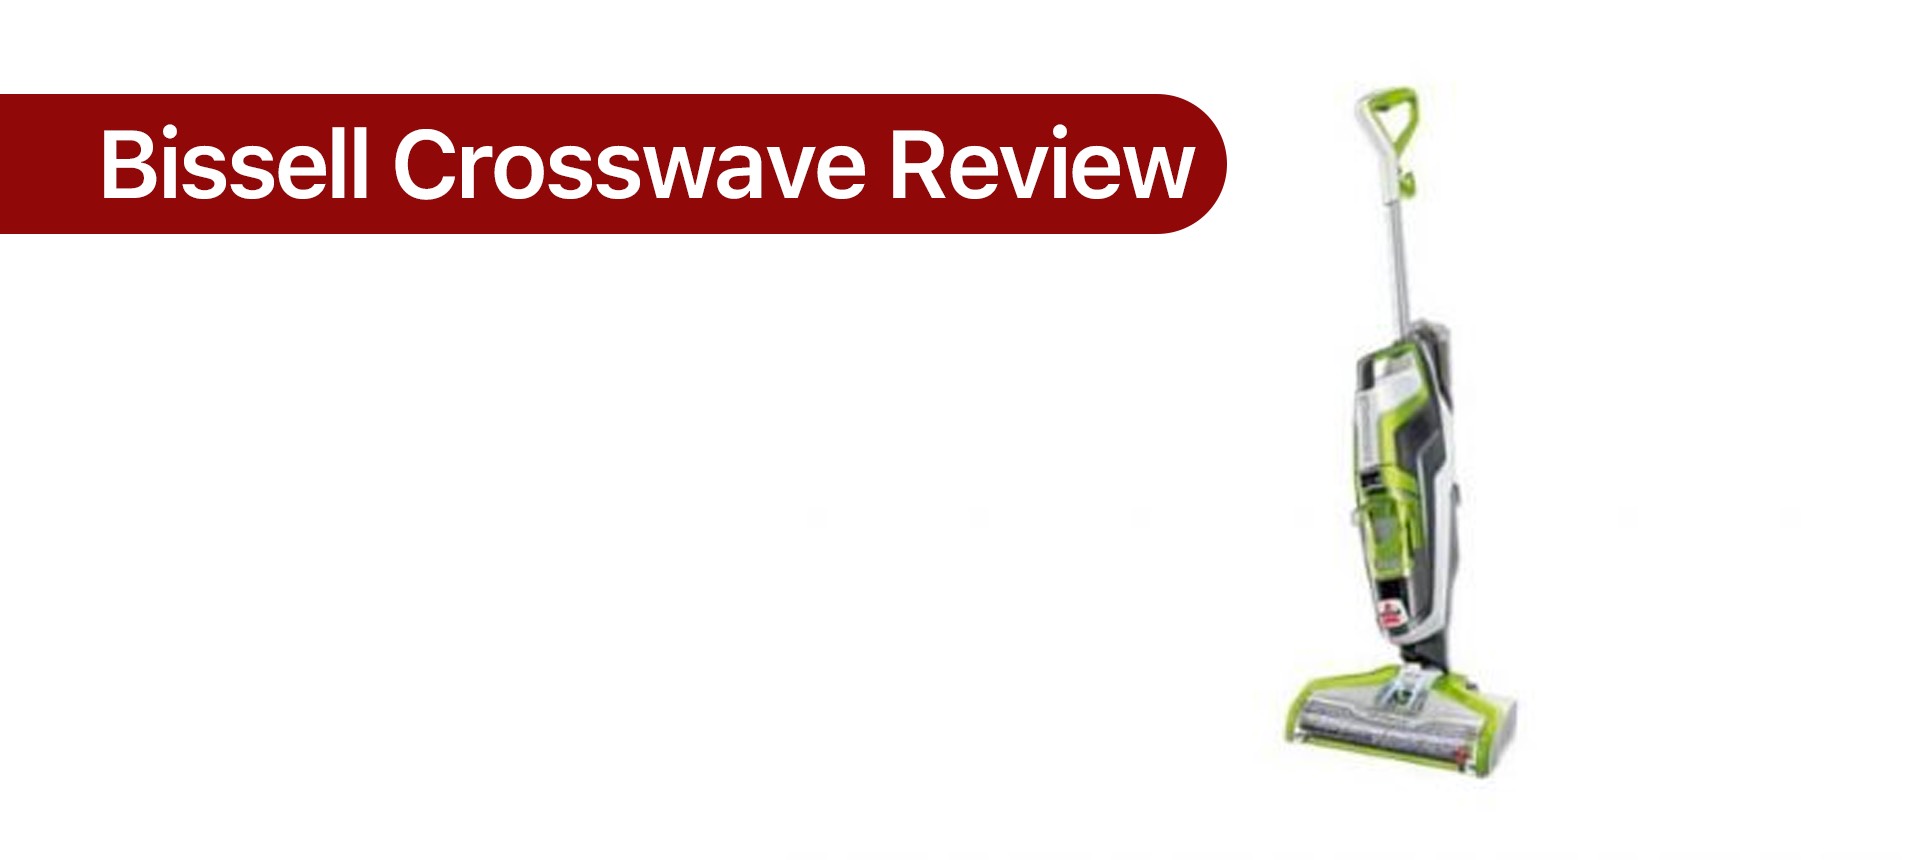 Bissell Crosswave Review